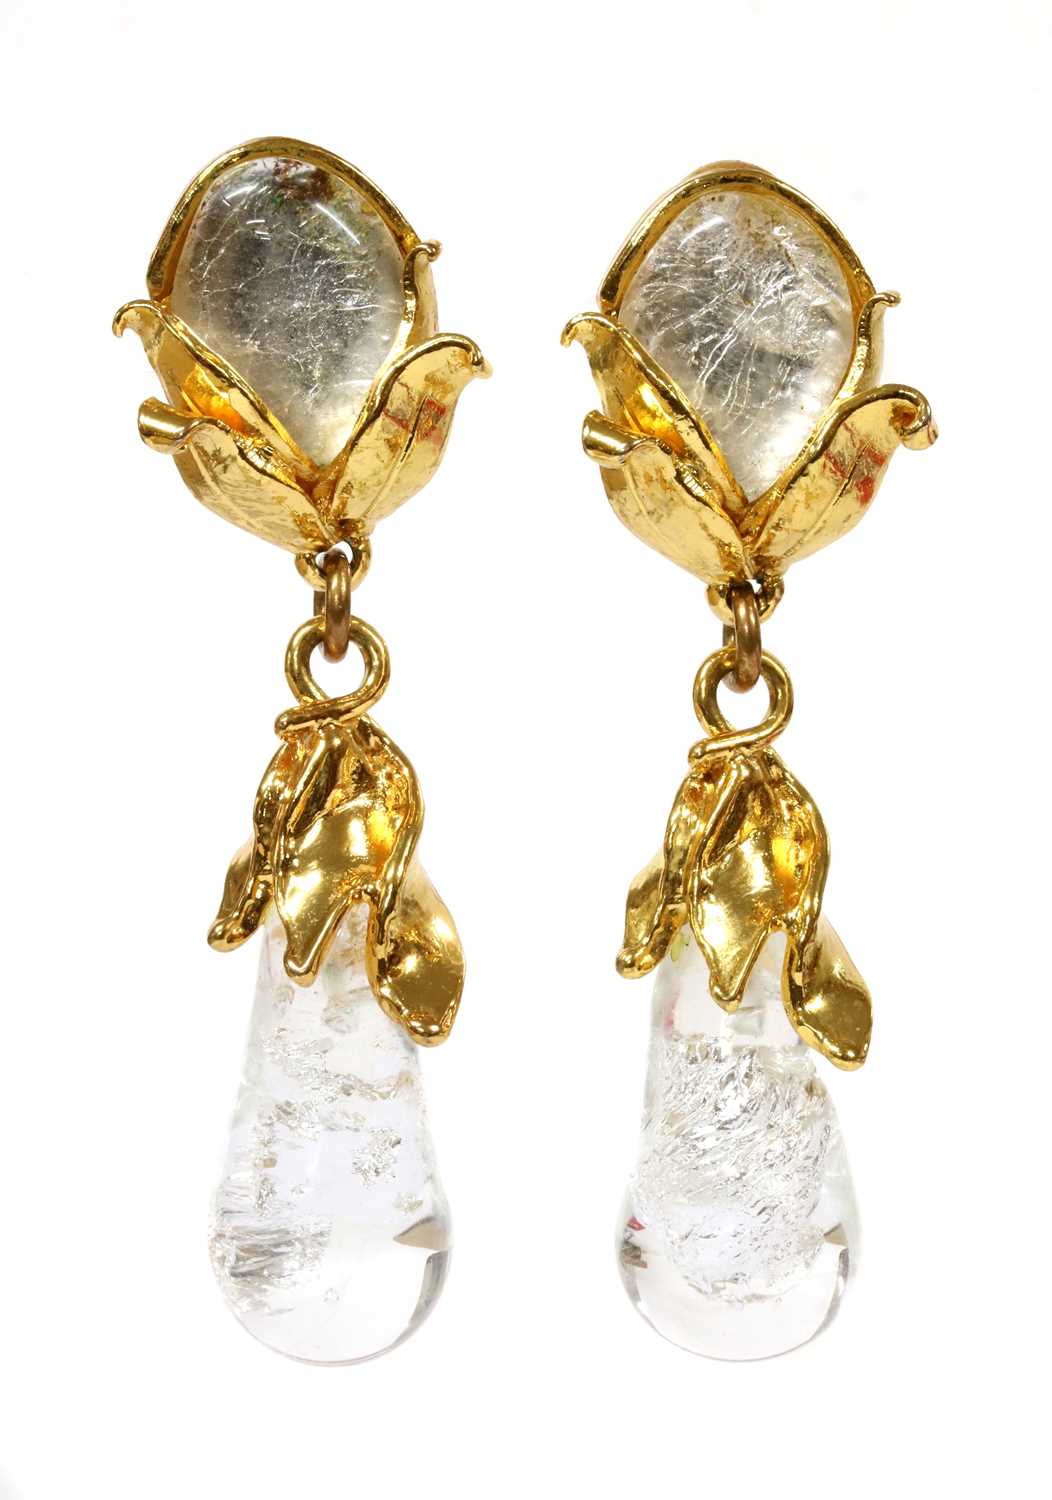 Lot 187 - A pair of gold-plated 'Rive Gauche' drop earrings by Yves Saint Laurent